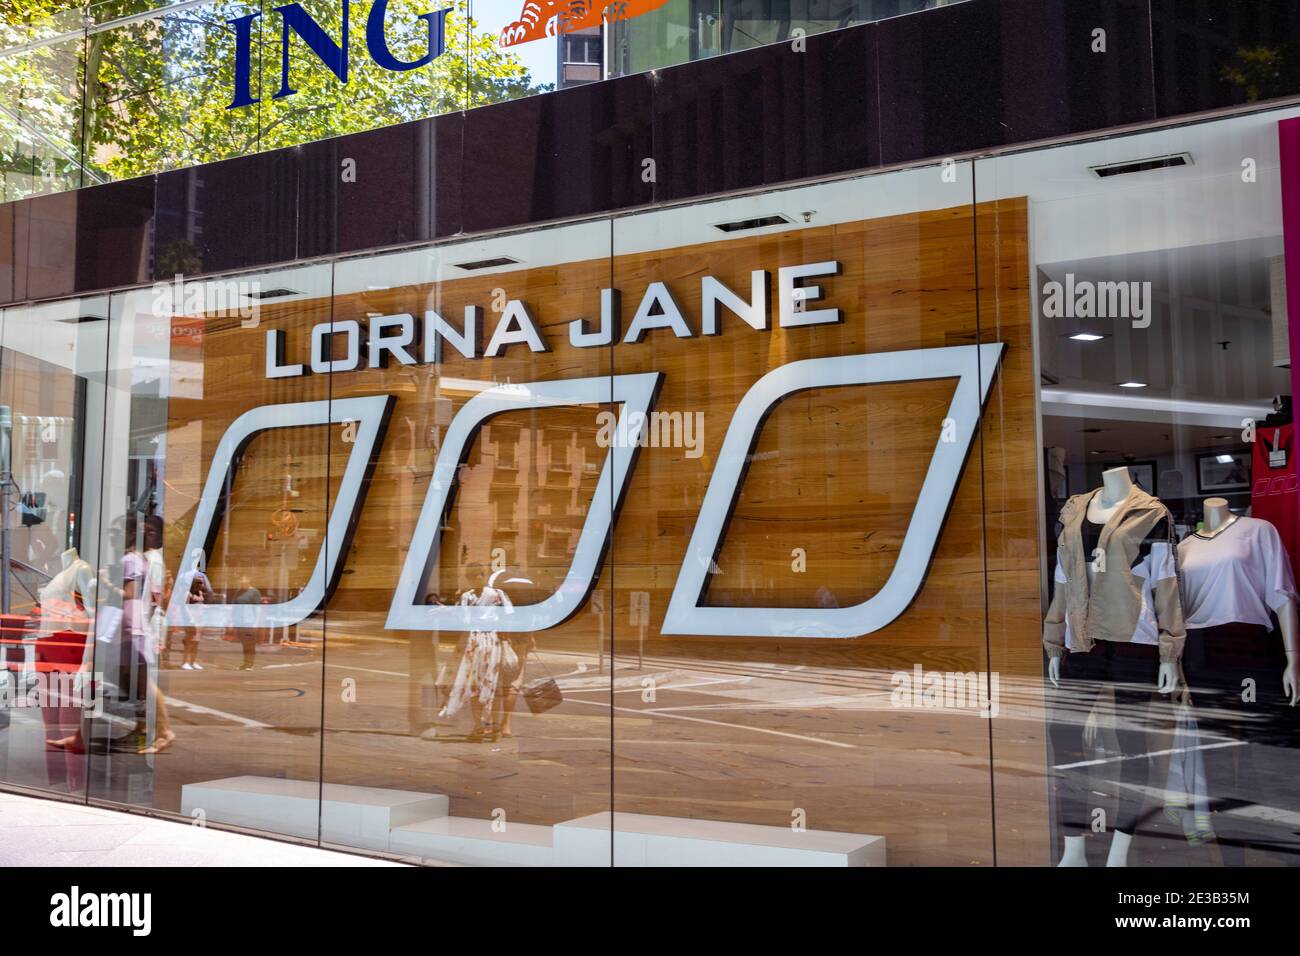 Lorna Jane activewear store in Sydney, lorna Jane sells sports and leisure clothes for women,Sydney,Australia Stock Photo